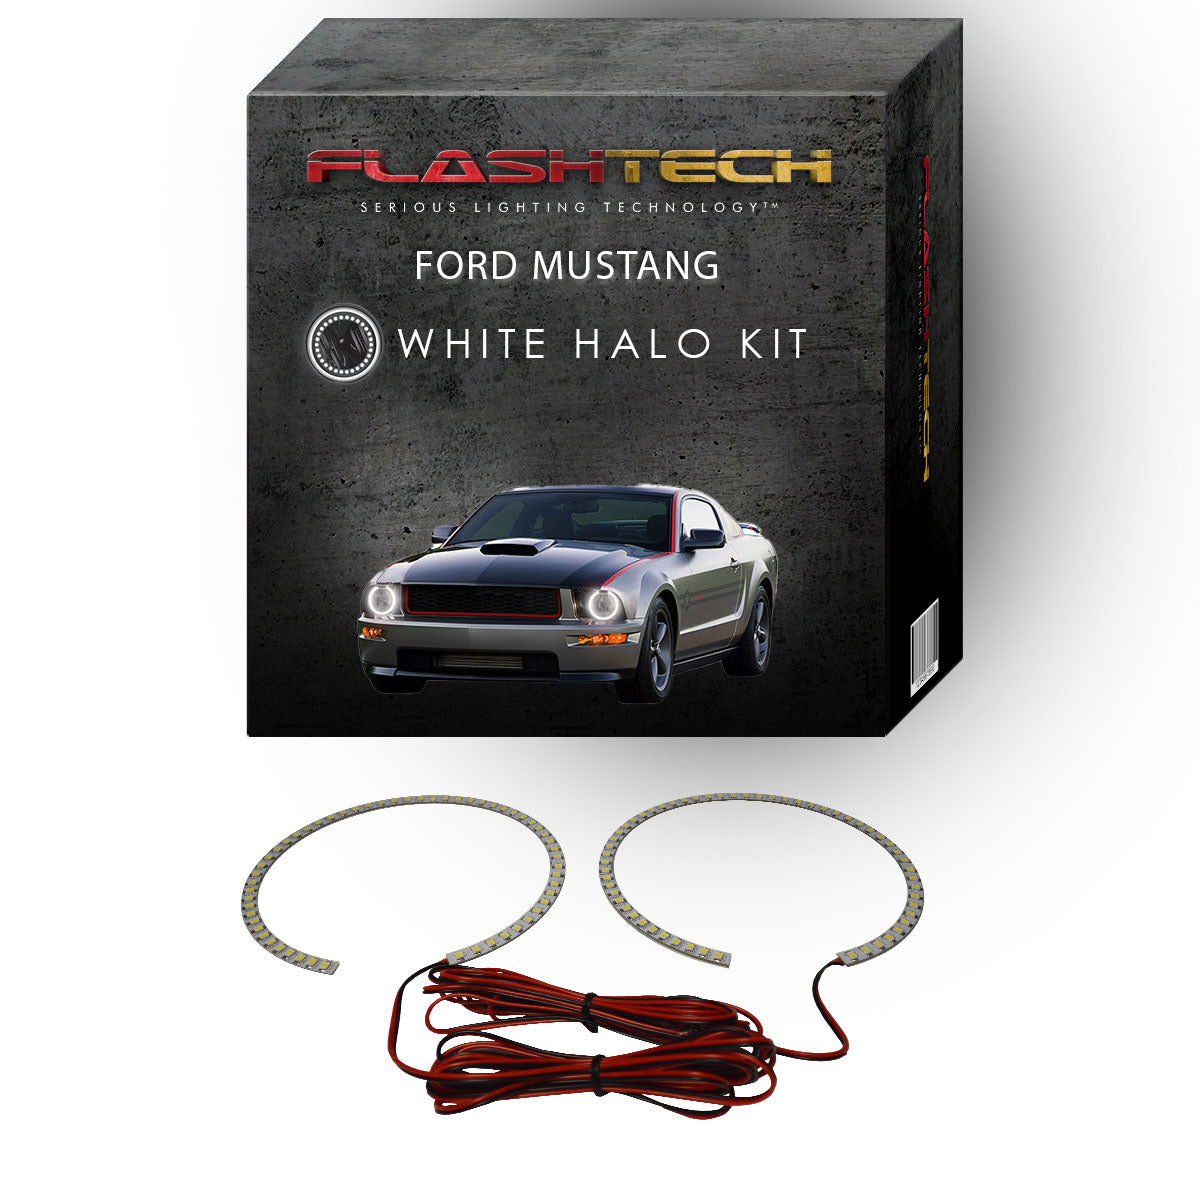 Ford-Mustang-2005, 2006, 2007, 2008, 2009-LED-Halo-Headlights-White-RF Remote White-FO-MU0509-WHRF